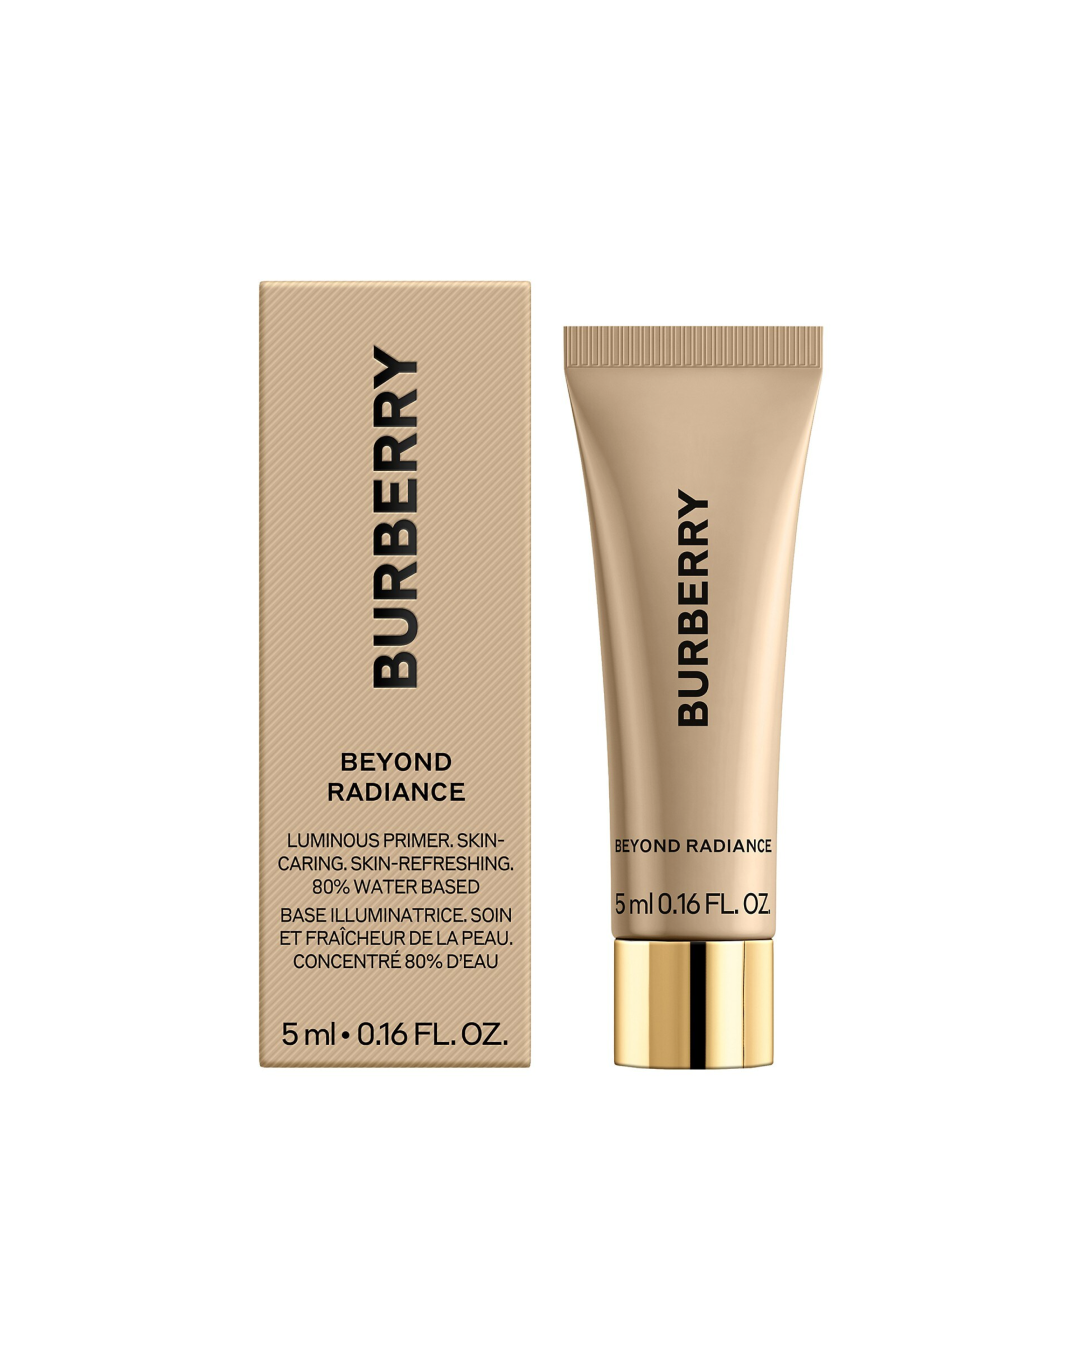 Burberry Beyond Radiance Primer in Bare Glow (5ml) - Best Buy World Philippines